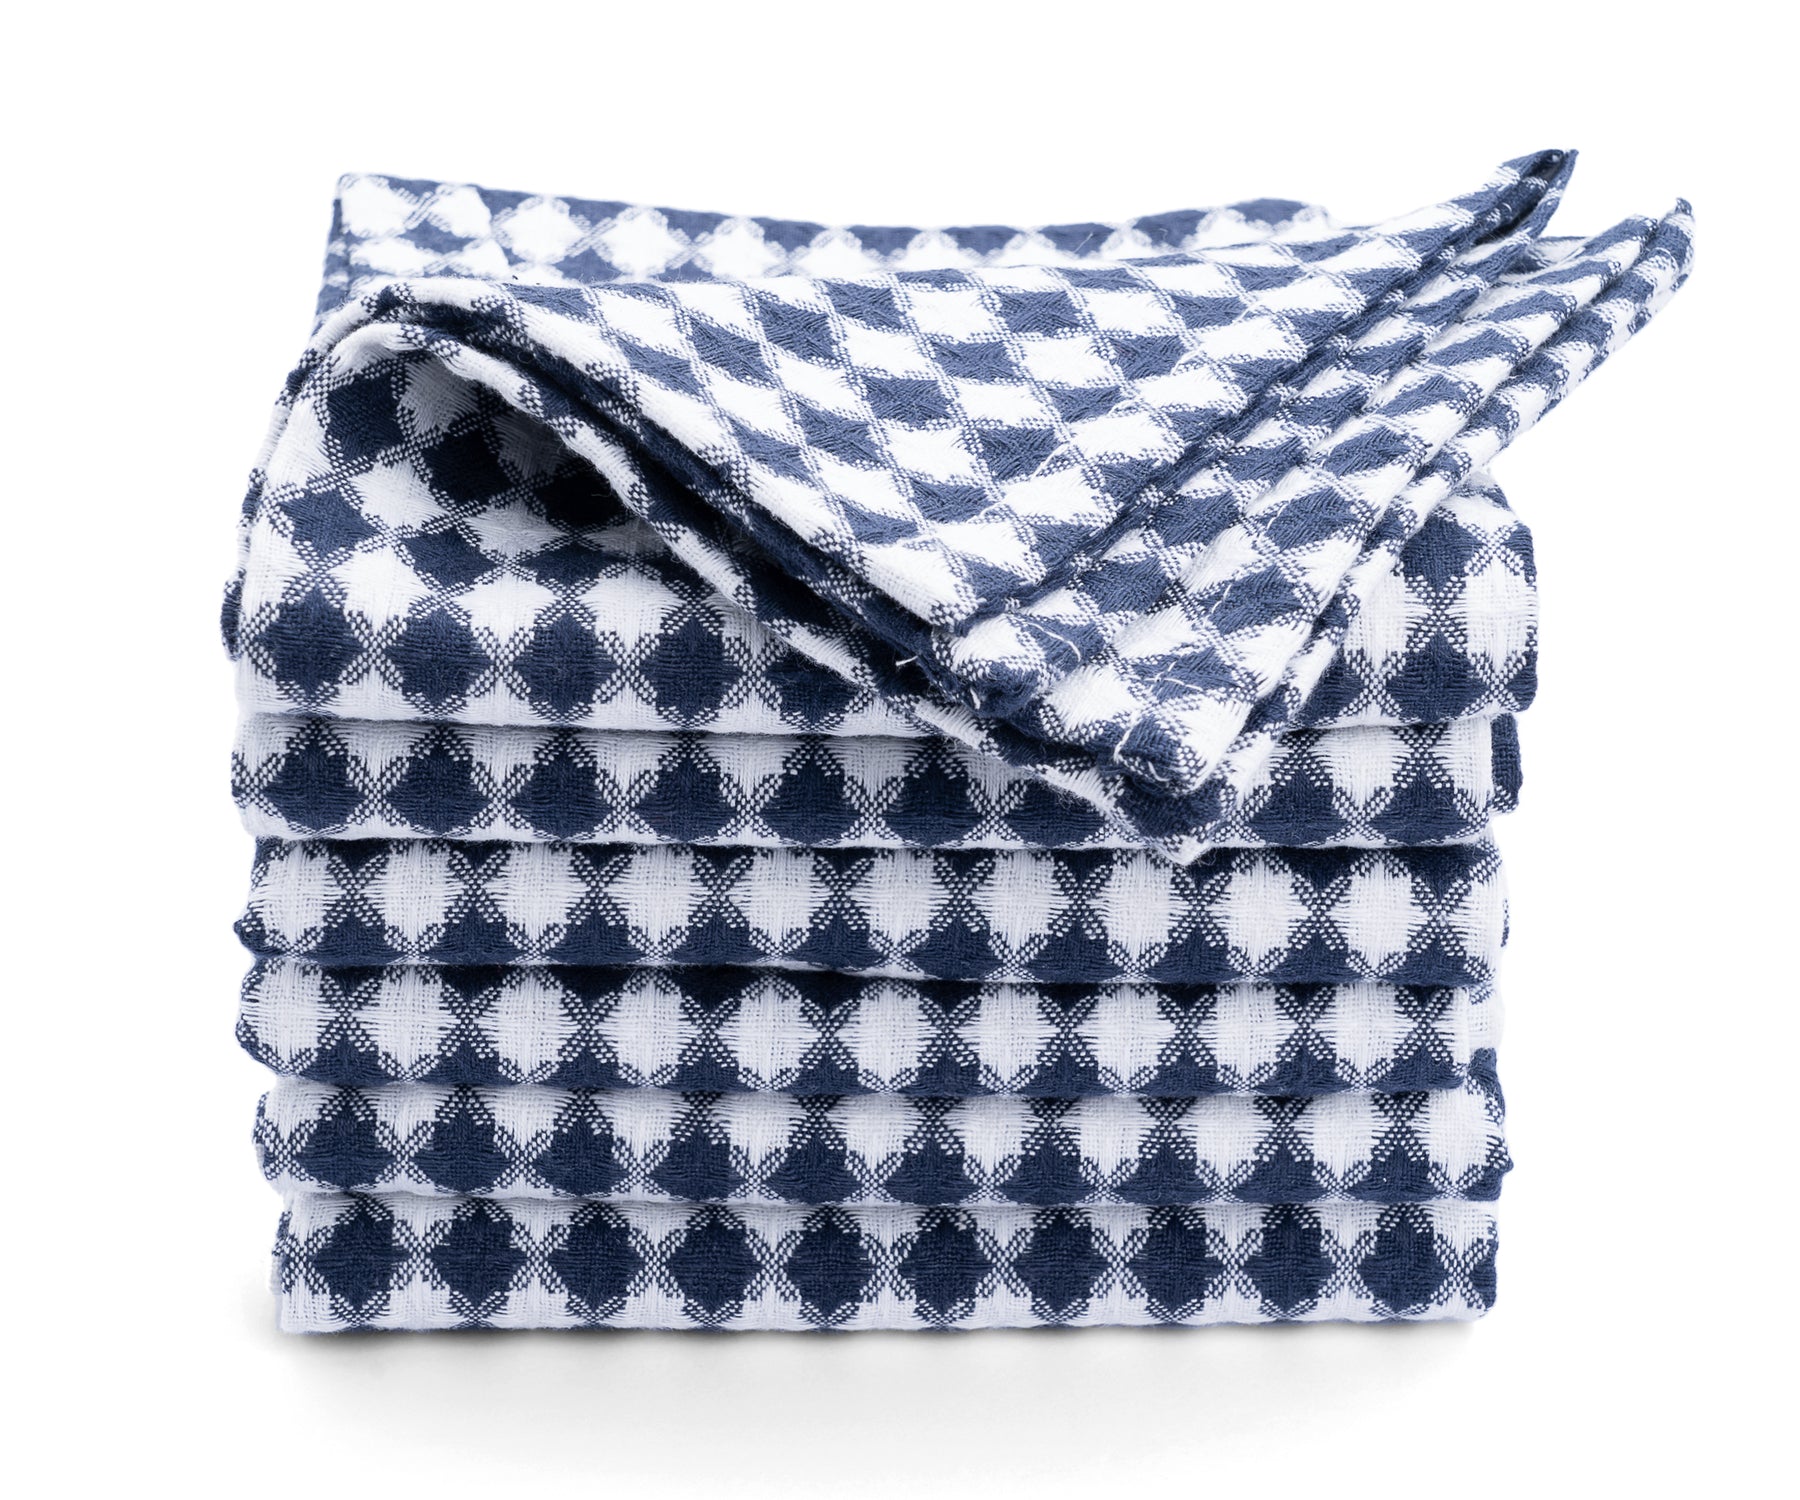 100% pure cotton kitchen towels absorbent dishtowels navy and white mixed diamond patterns.